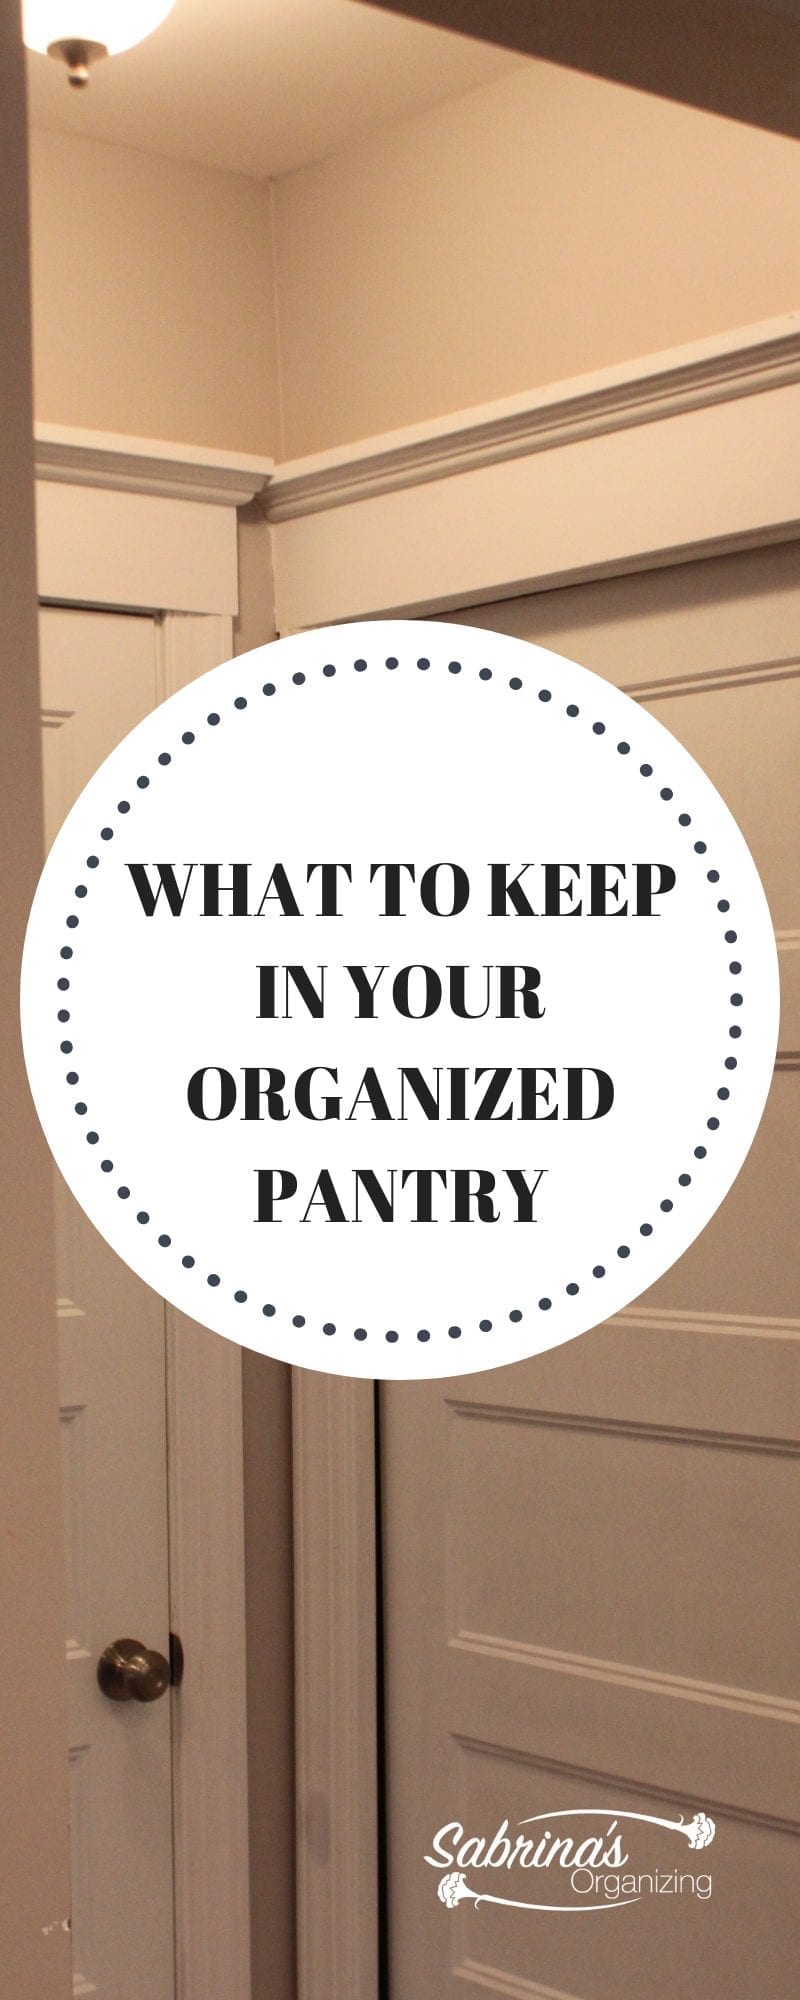 What to keep in your organized pantry 